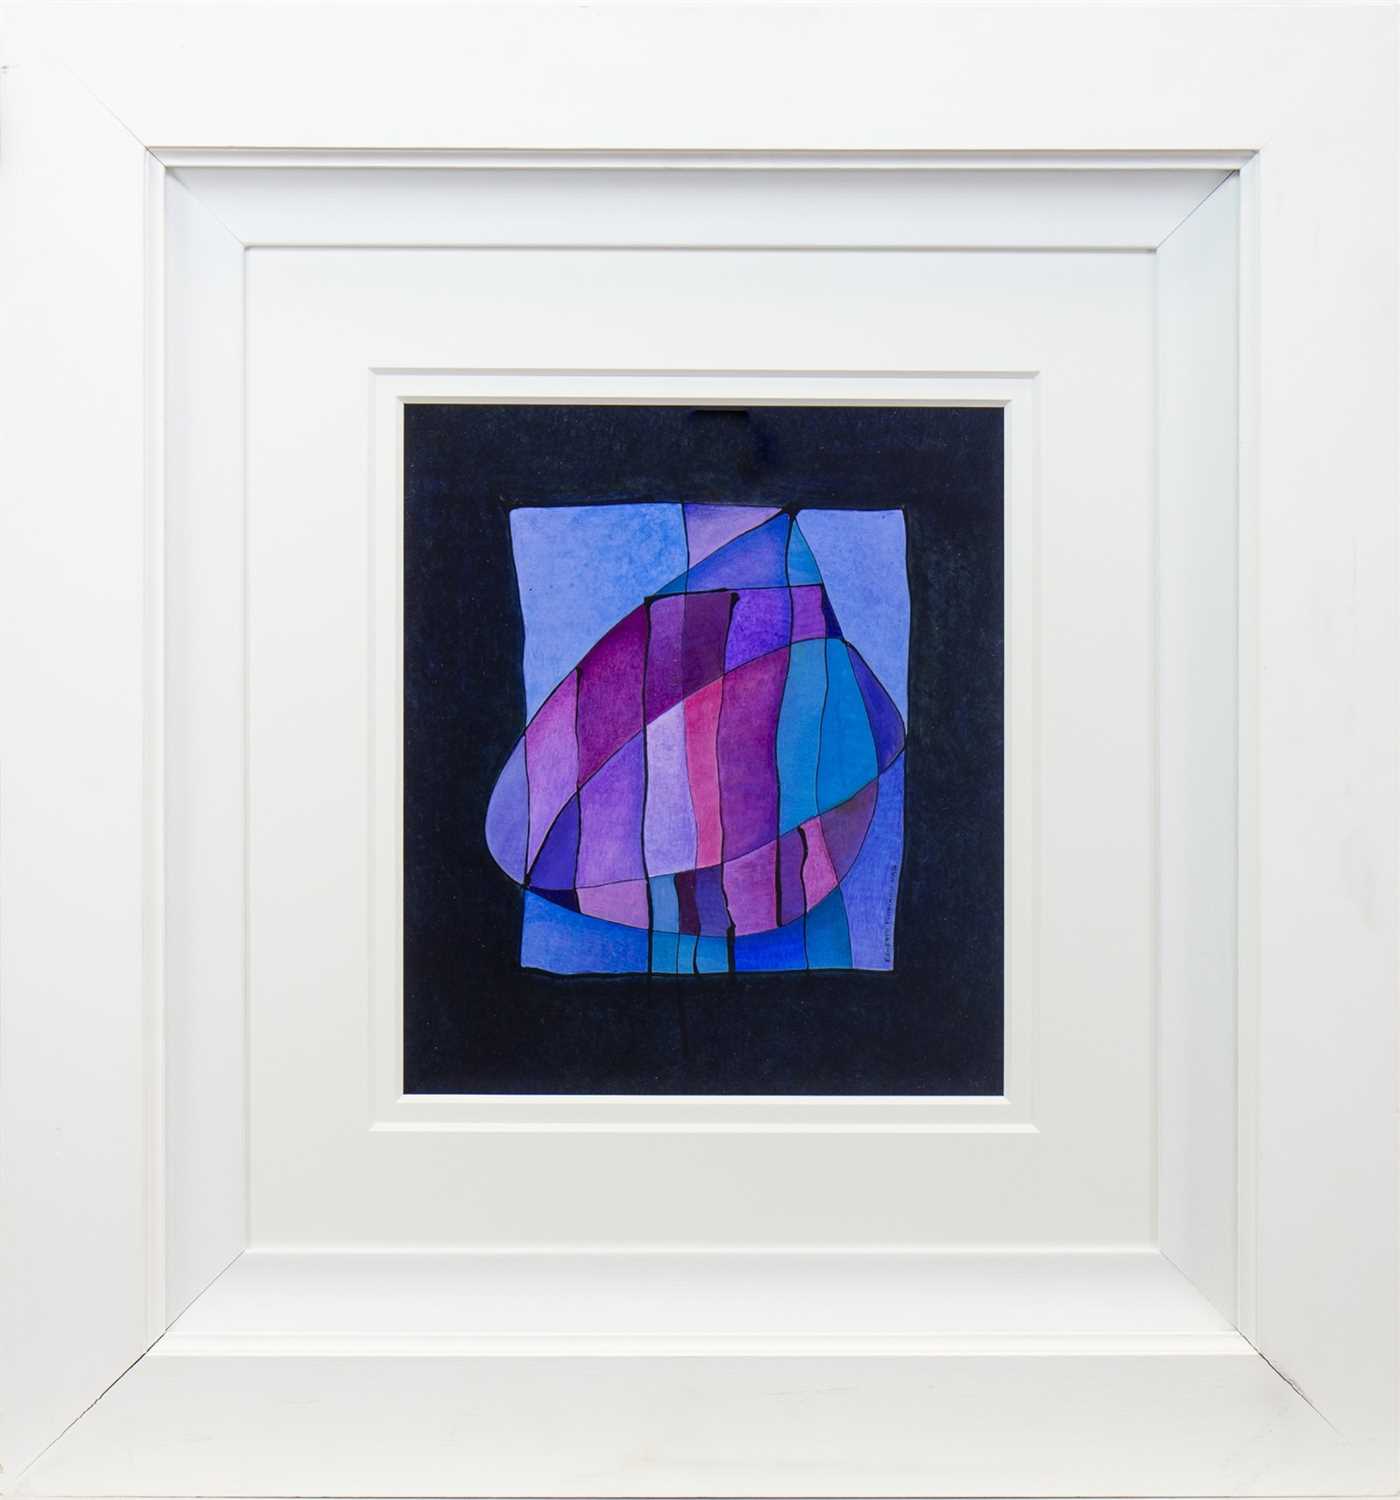 Lot 765 - BLUE PURPLE ROSE, AN ACRYLIC BY ERNESTO FLORIANO VAZ